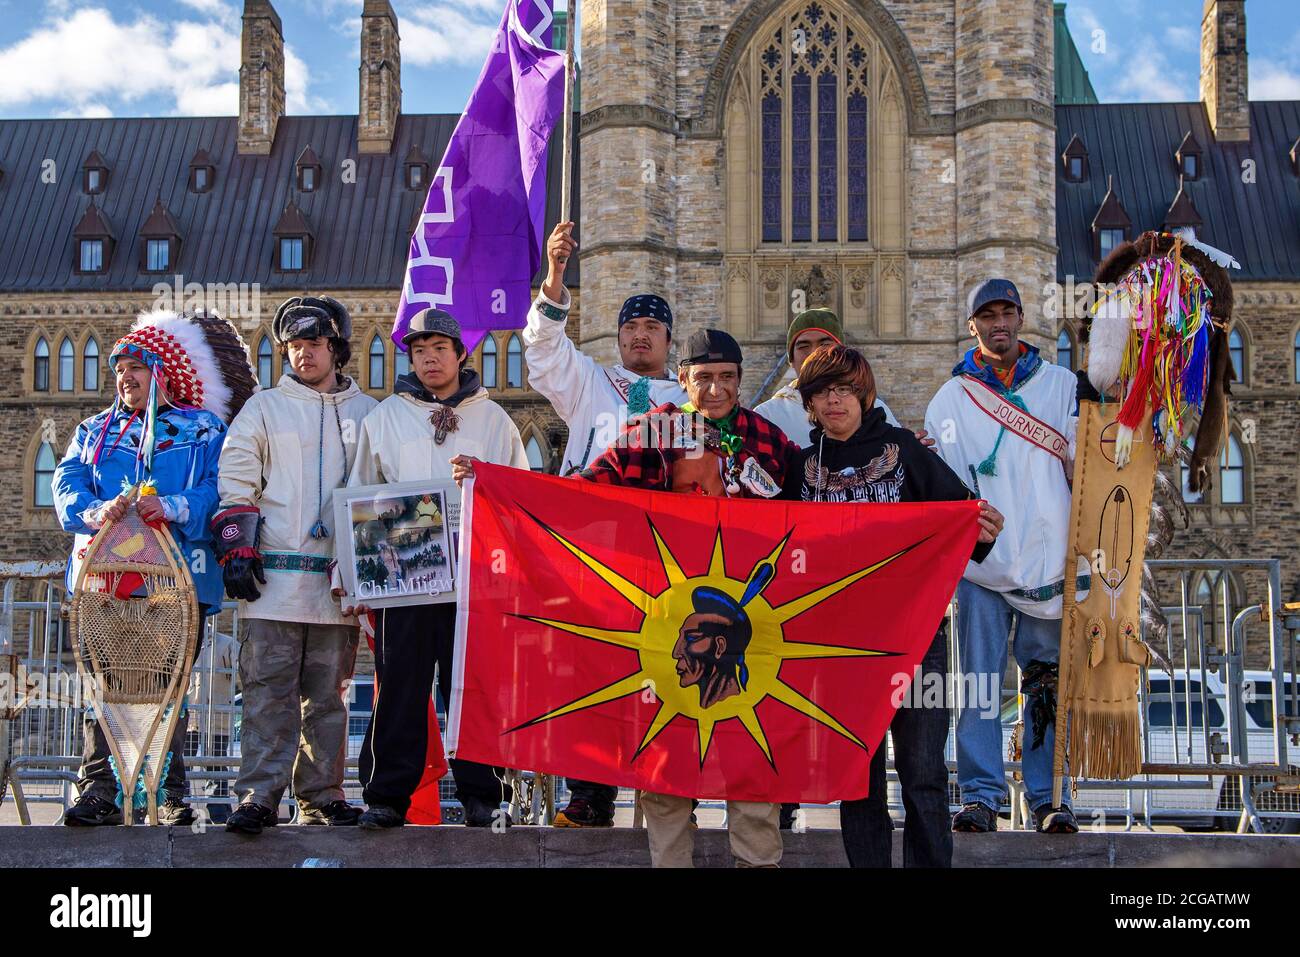 Ottawa, Canada - March 25, 2013: The group of Cree youth that walked 1600 kilometers from their home in Whapmagoostui, Que to bring attention aboriginal issues at the end of their journey on Parliament Hill in Ottawa, Ontario Part of the Idle No More Protest Stock Photo